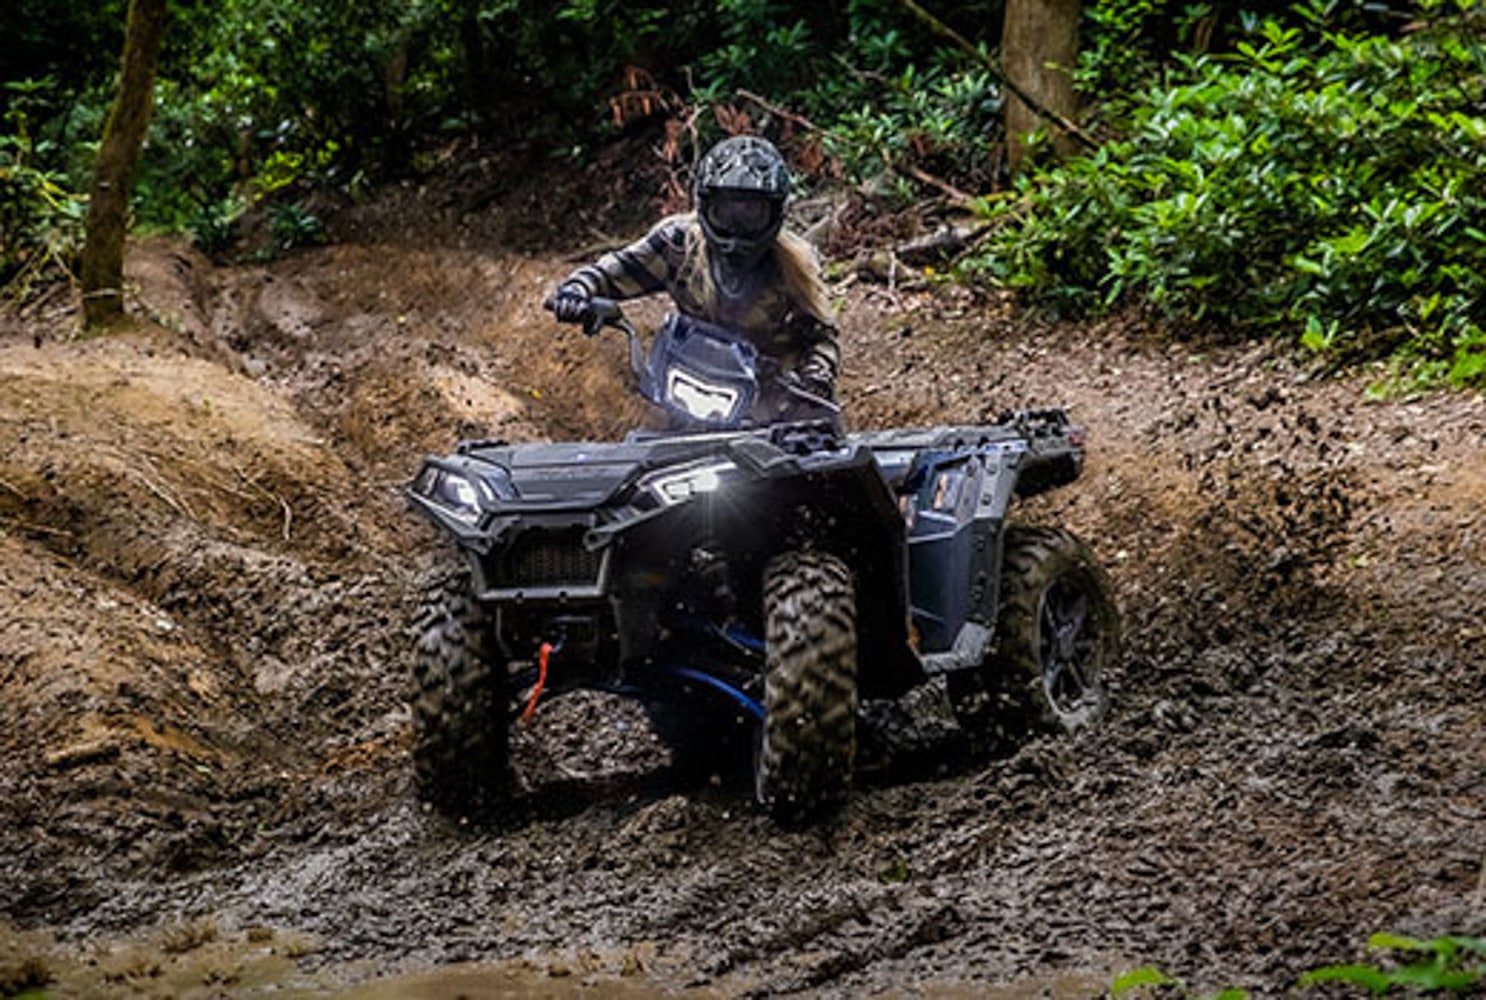 The Five Top ATV's to Buy in 2022